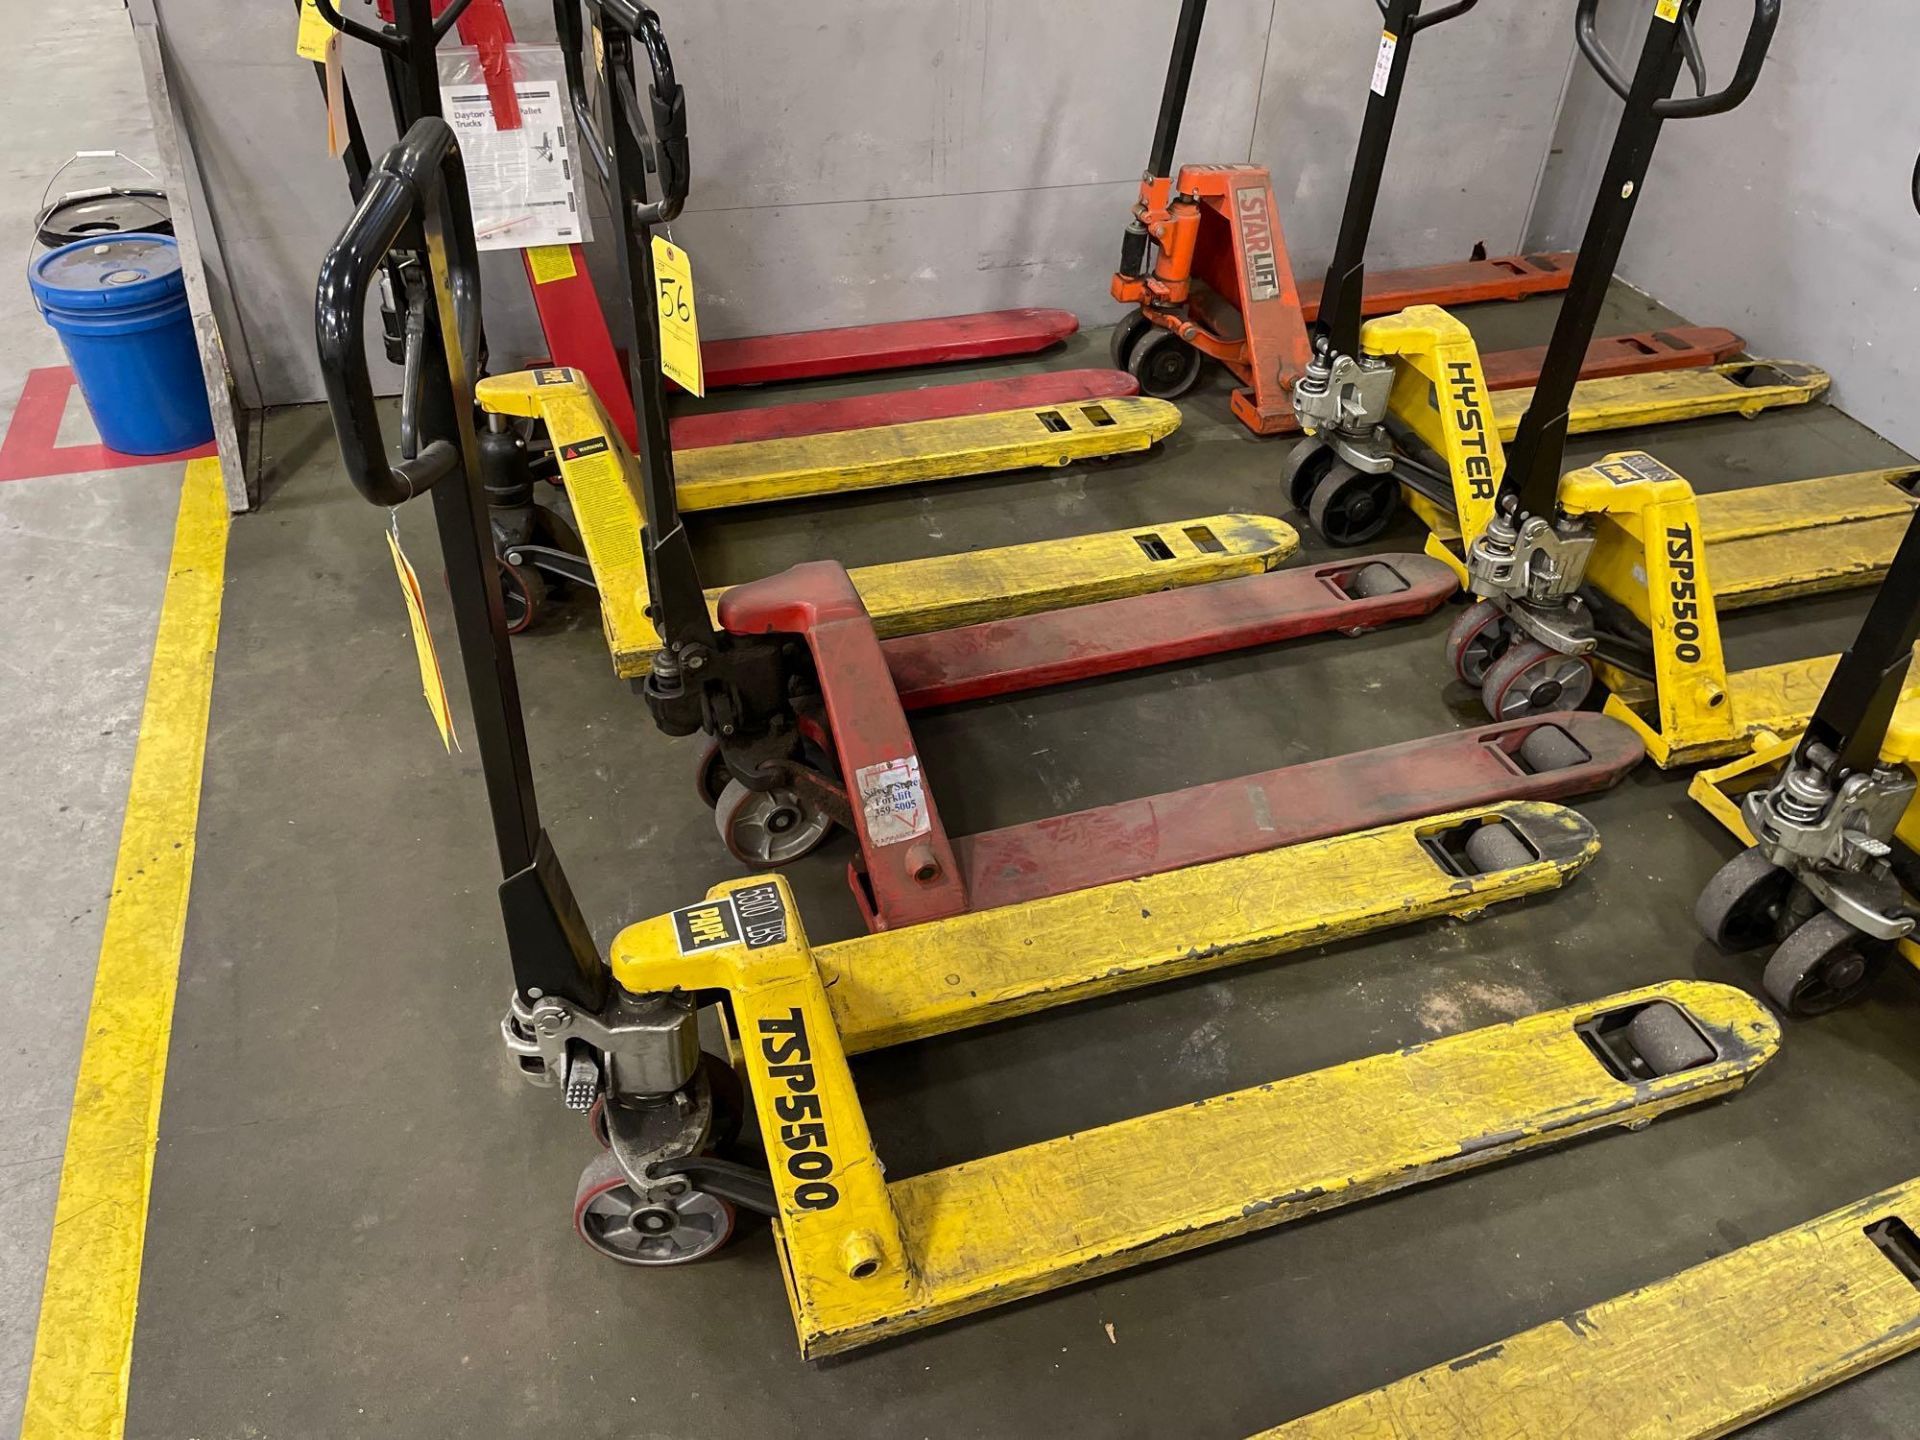 Lot of 2 Pallet Jacks: (1) Pape, max. 5,500 lbs., (1) Hyster, max. 5,500 lbs. - Image 2 of 5